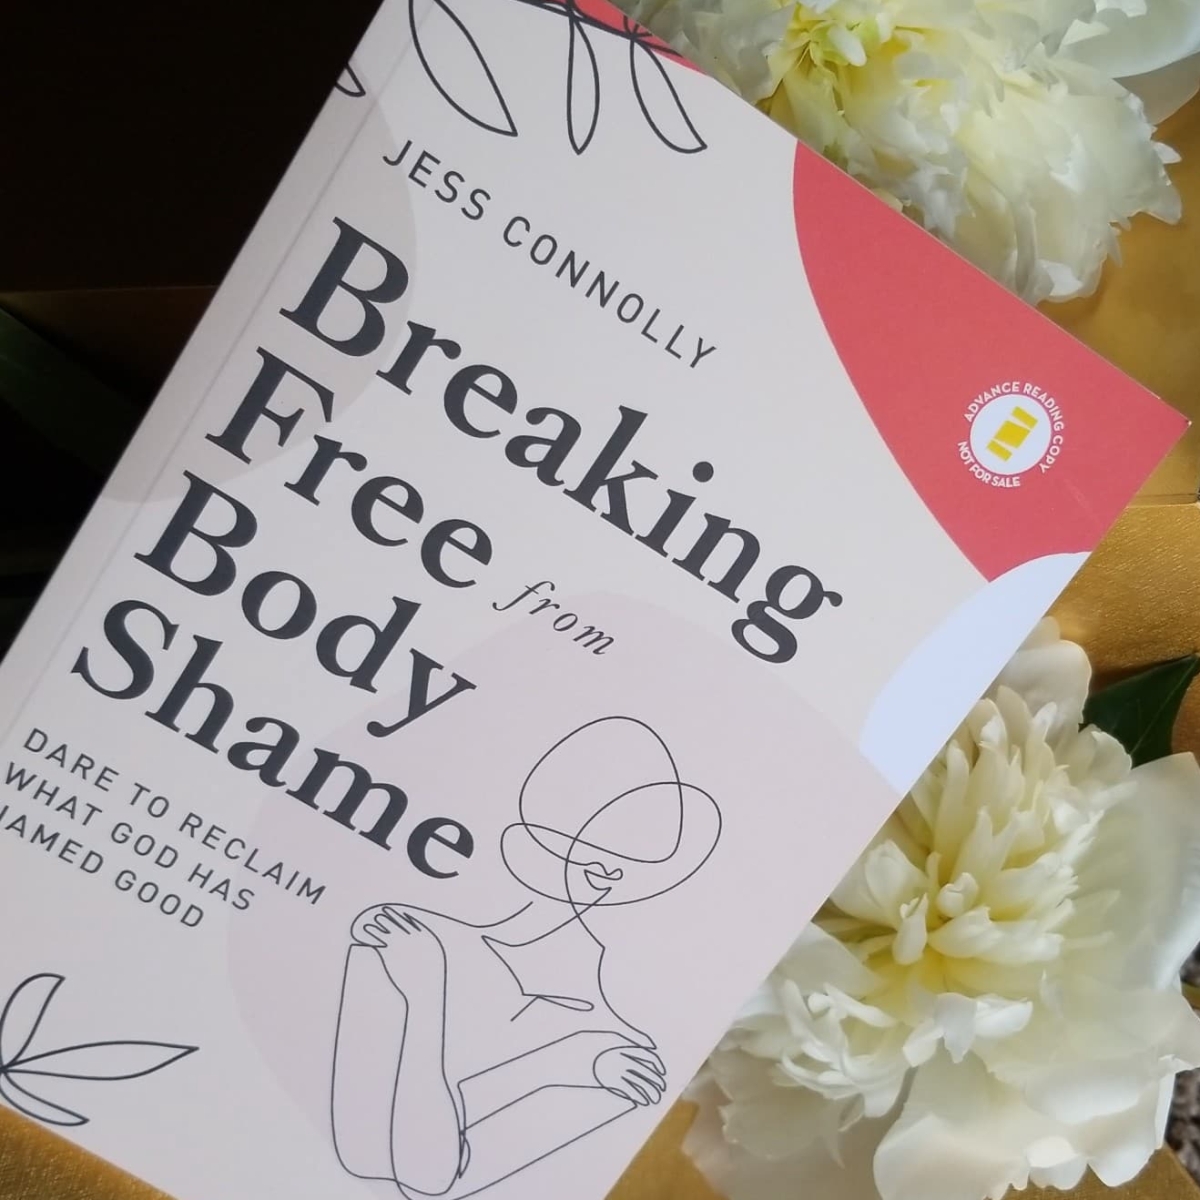 Jess Connelly and “Breaking Free From Body Shame”